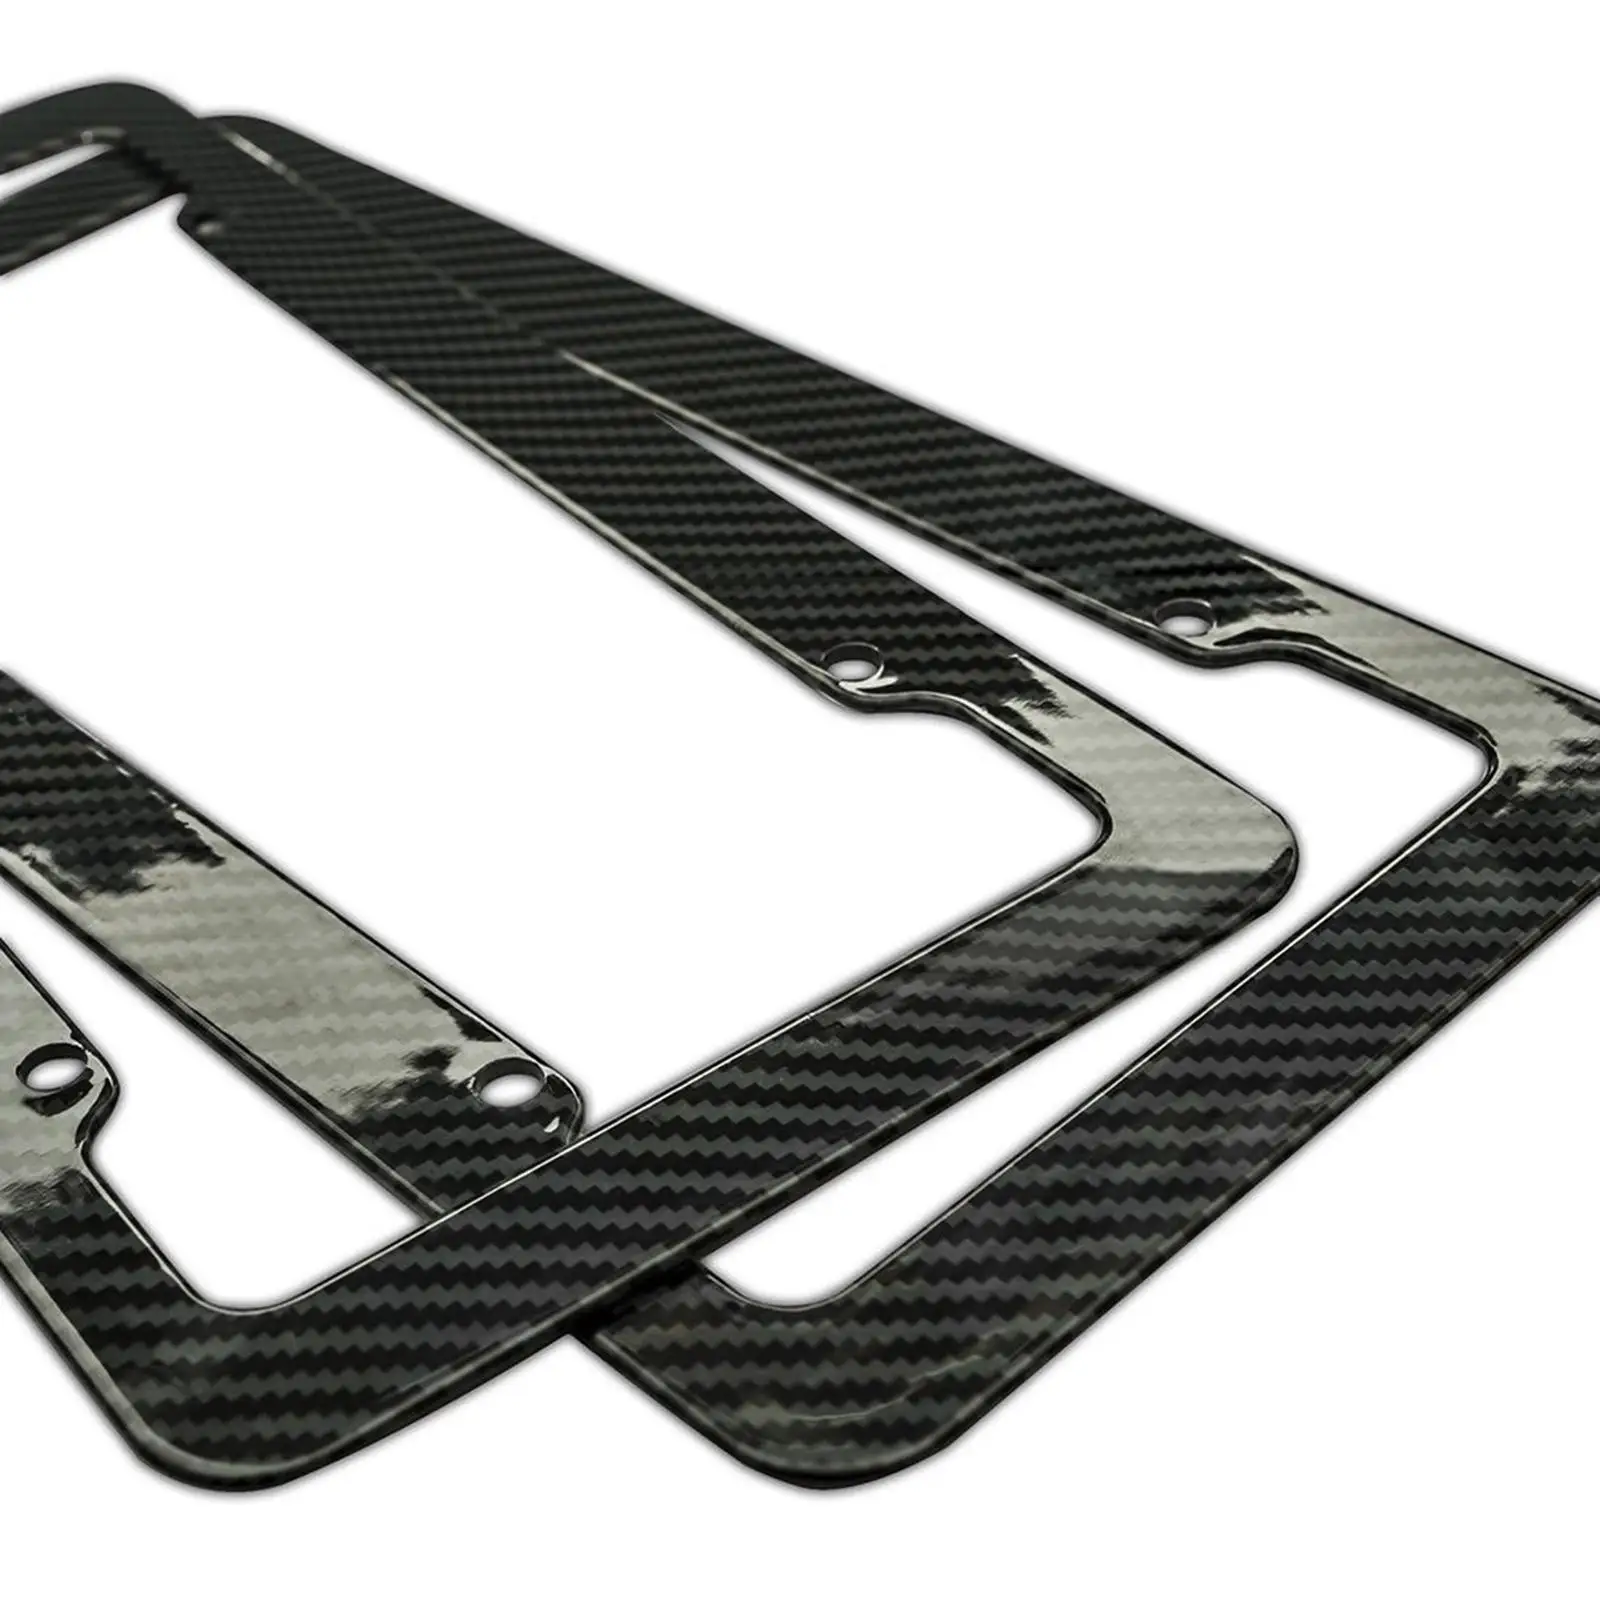 2 Pieces Carbon Fiber Style  Frames Front Rear for us Install